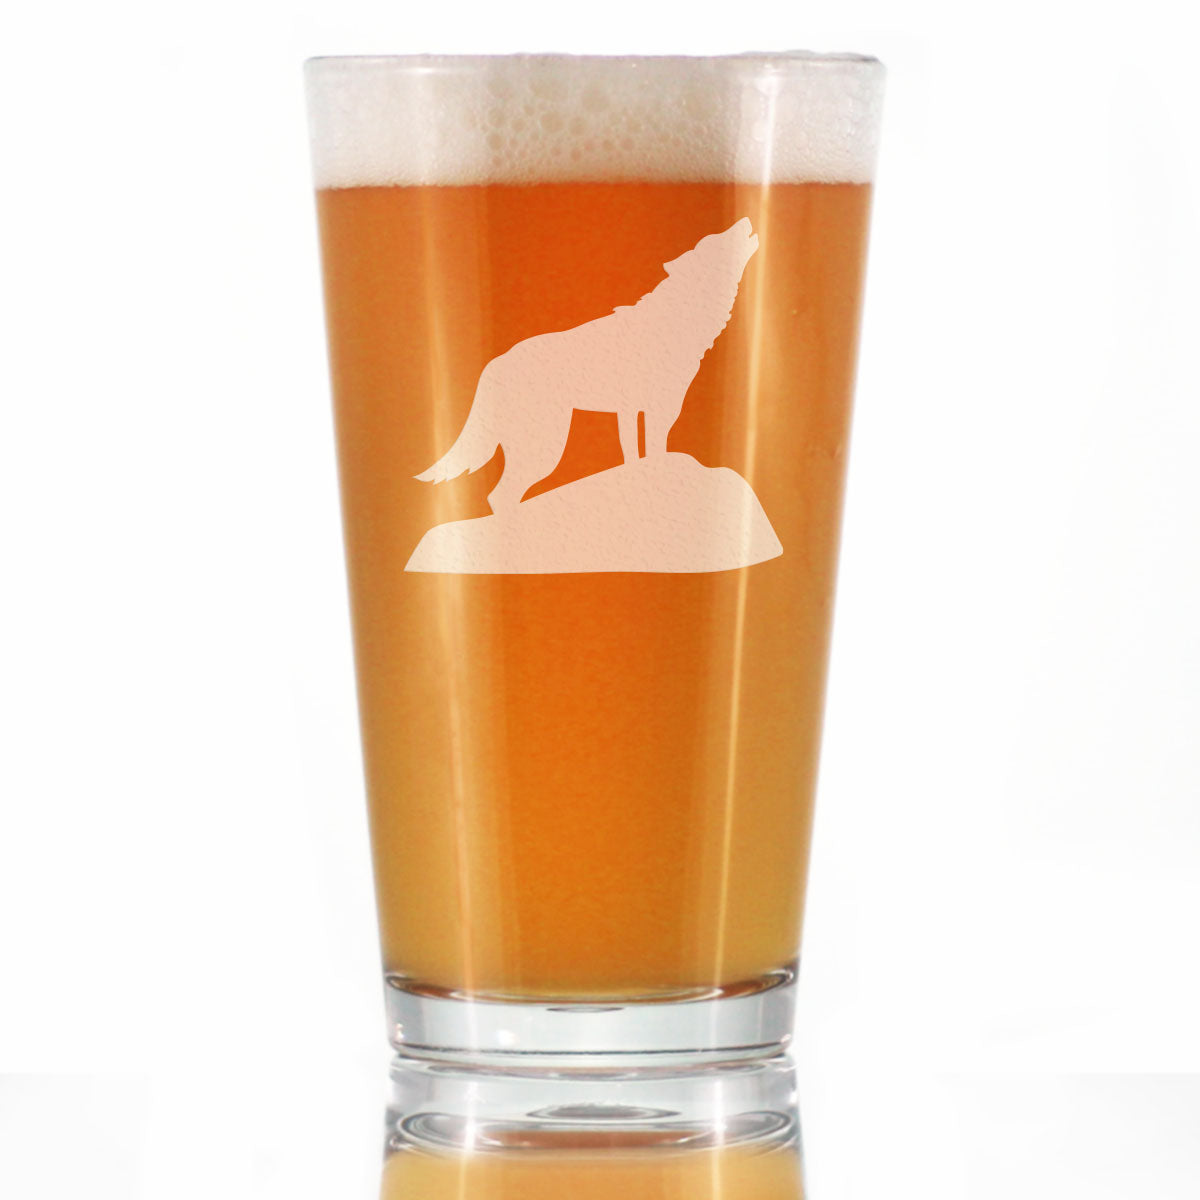 Wolf Pint Glass for Beer - Cabin Themed Gifts or Rustic Decor for Men and Women - Fun Drinking or Party Glasses - 16 oz